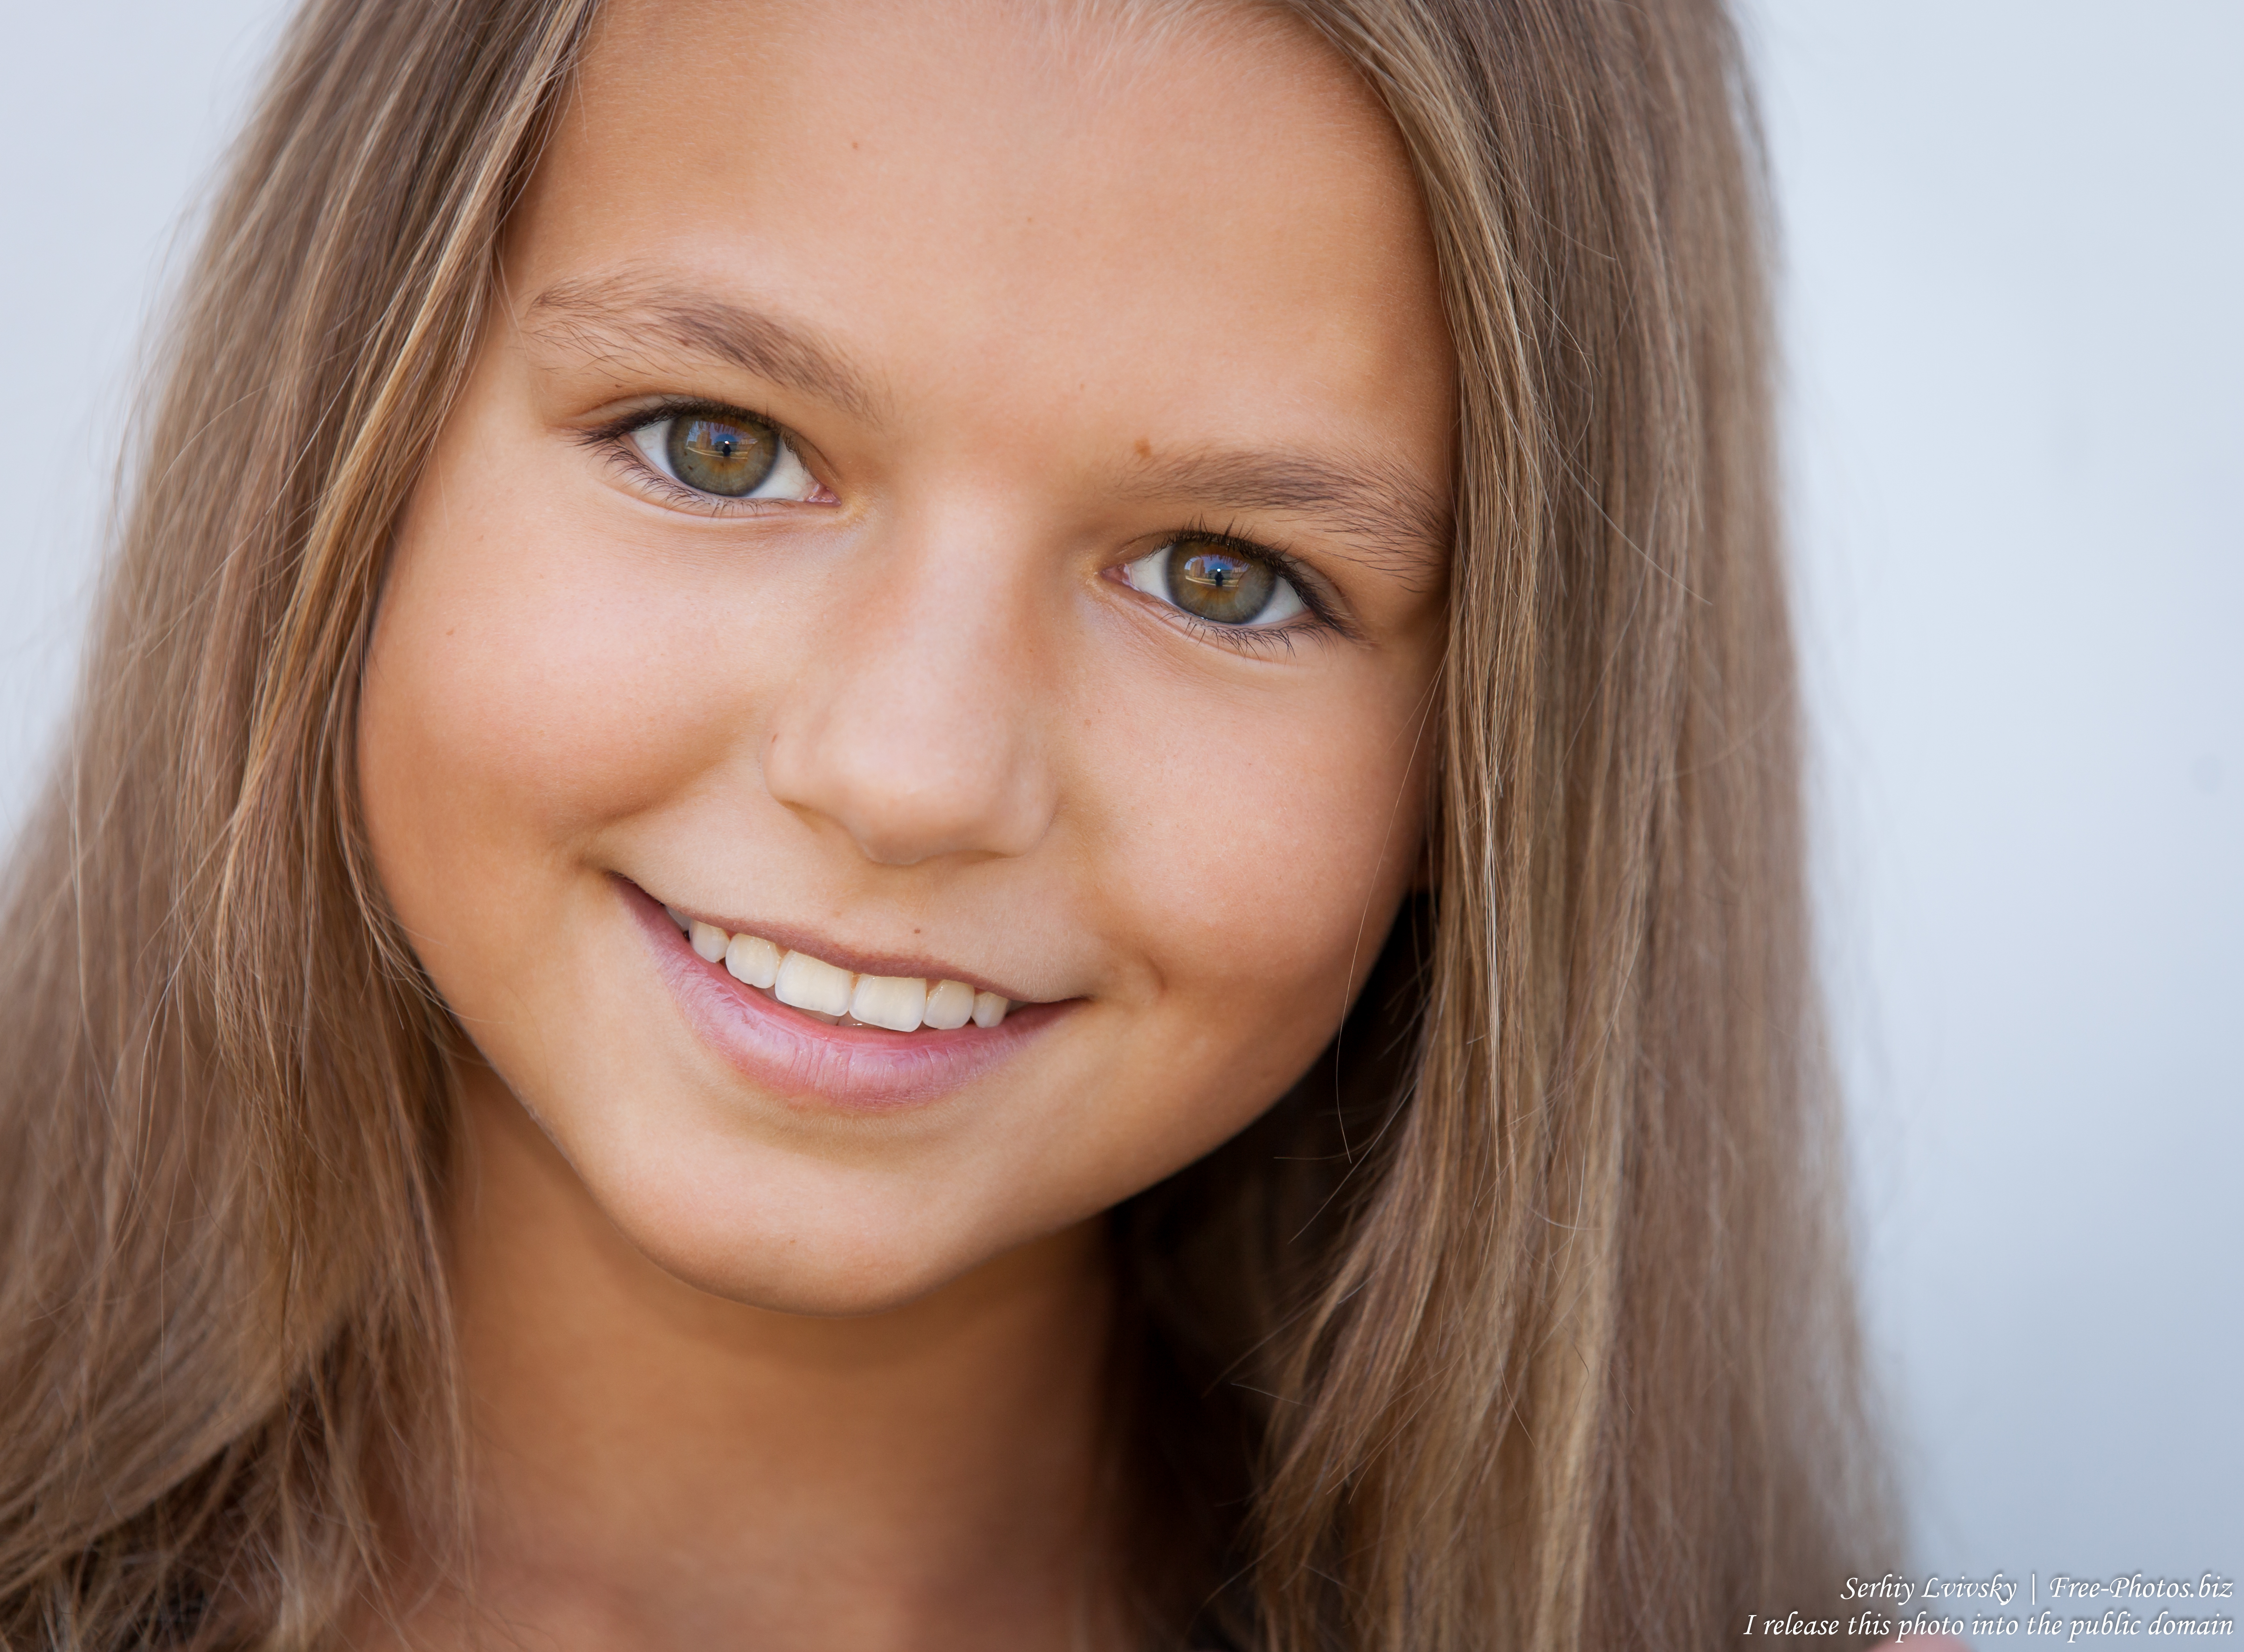 a twelve-year-old girl photographed in July 2015 by Serhiy Lvivsky, picture 1